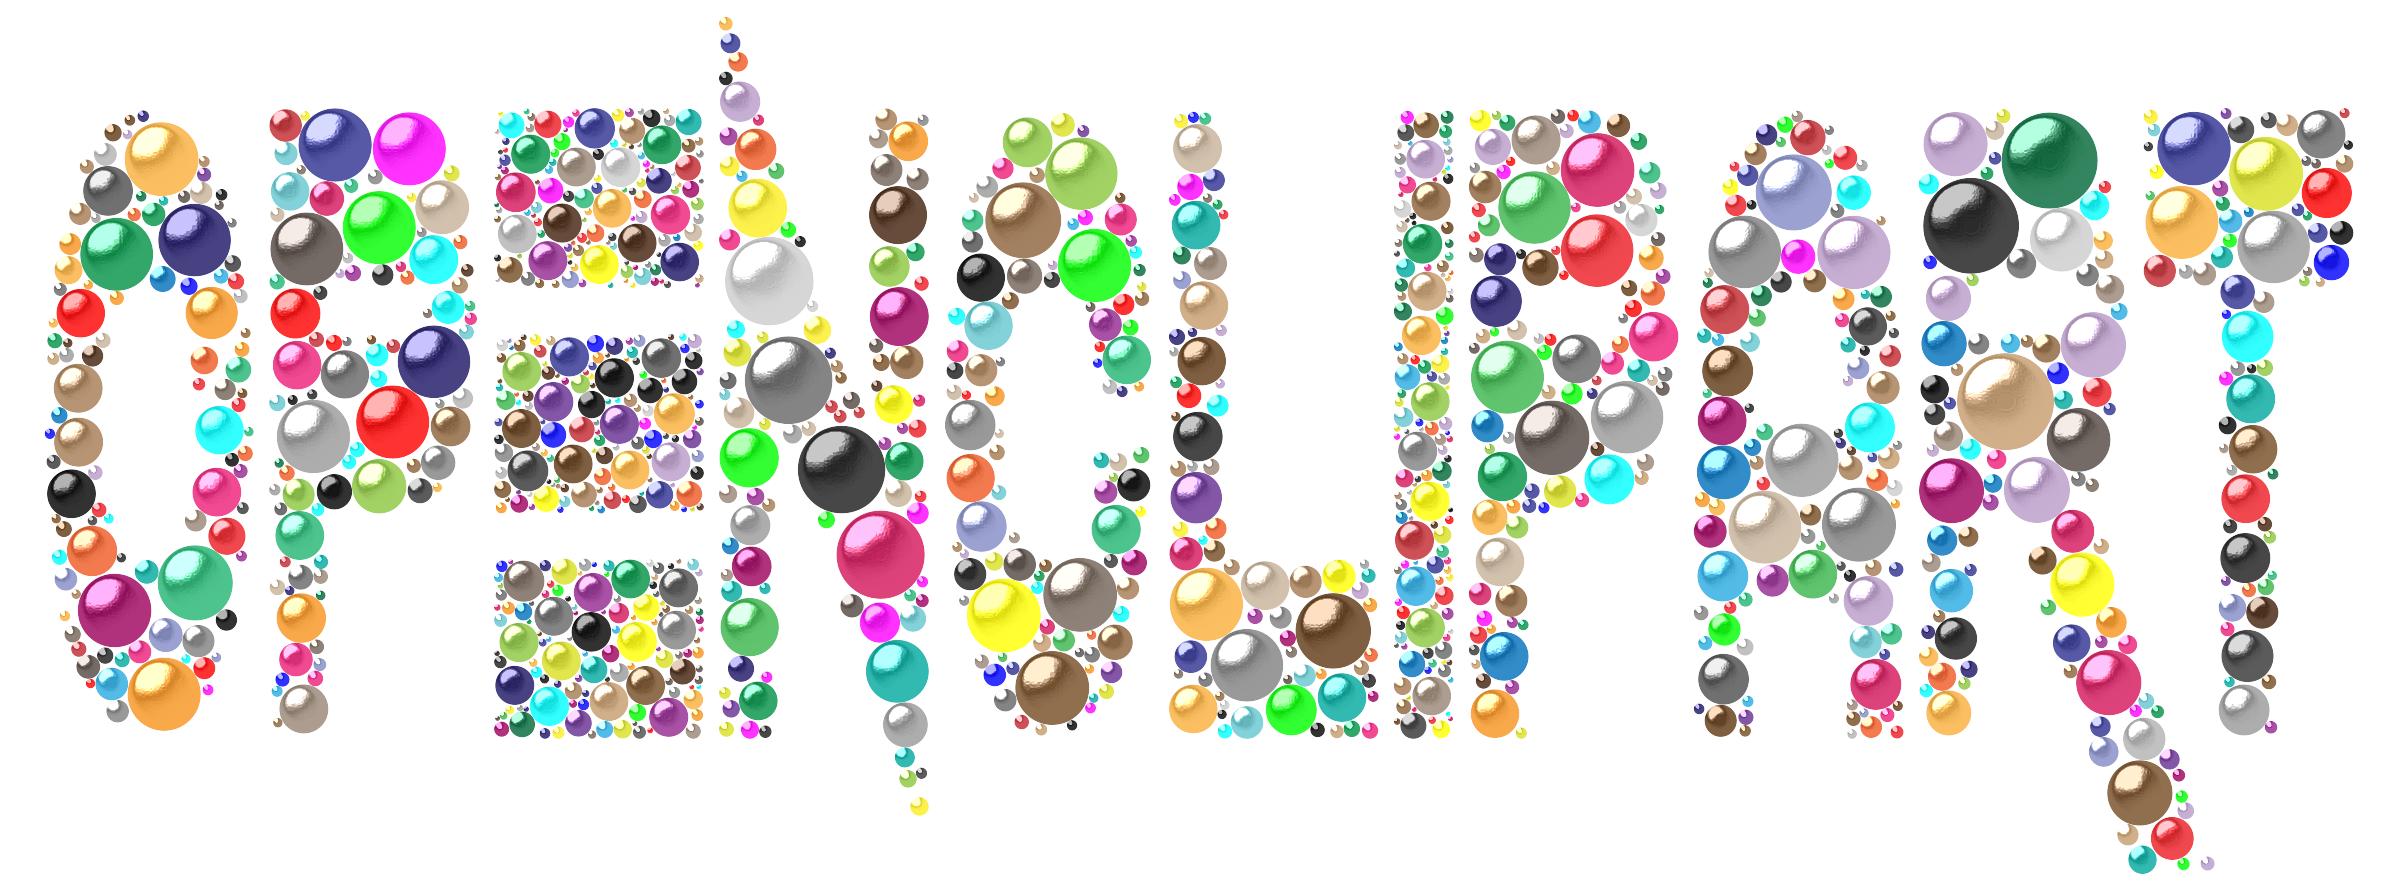 OpenClipart Typography Logo Technicolor Enhanced png